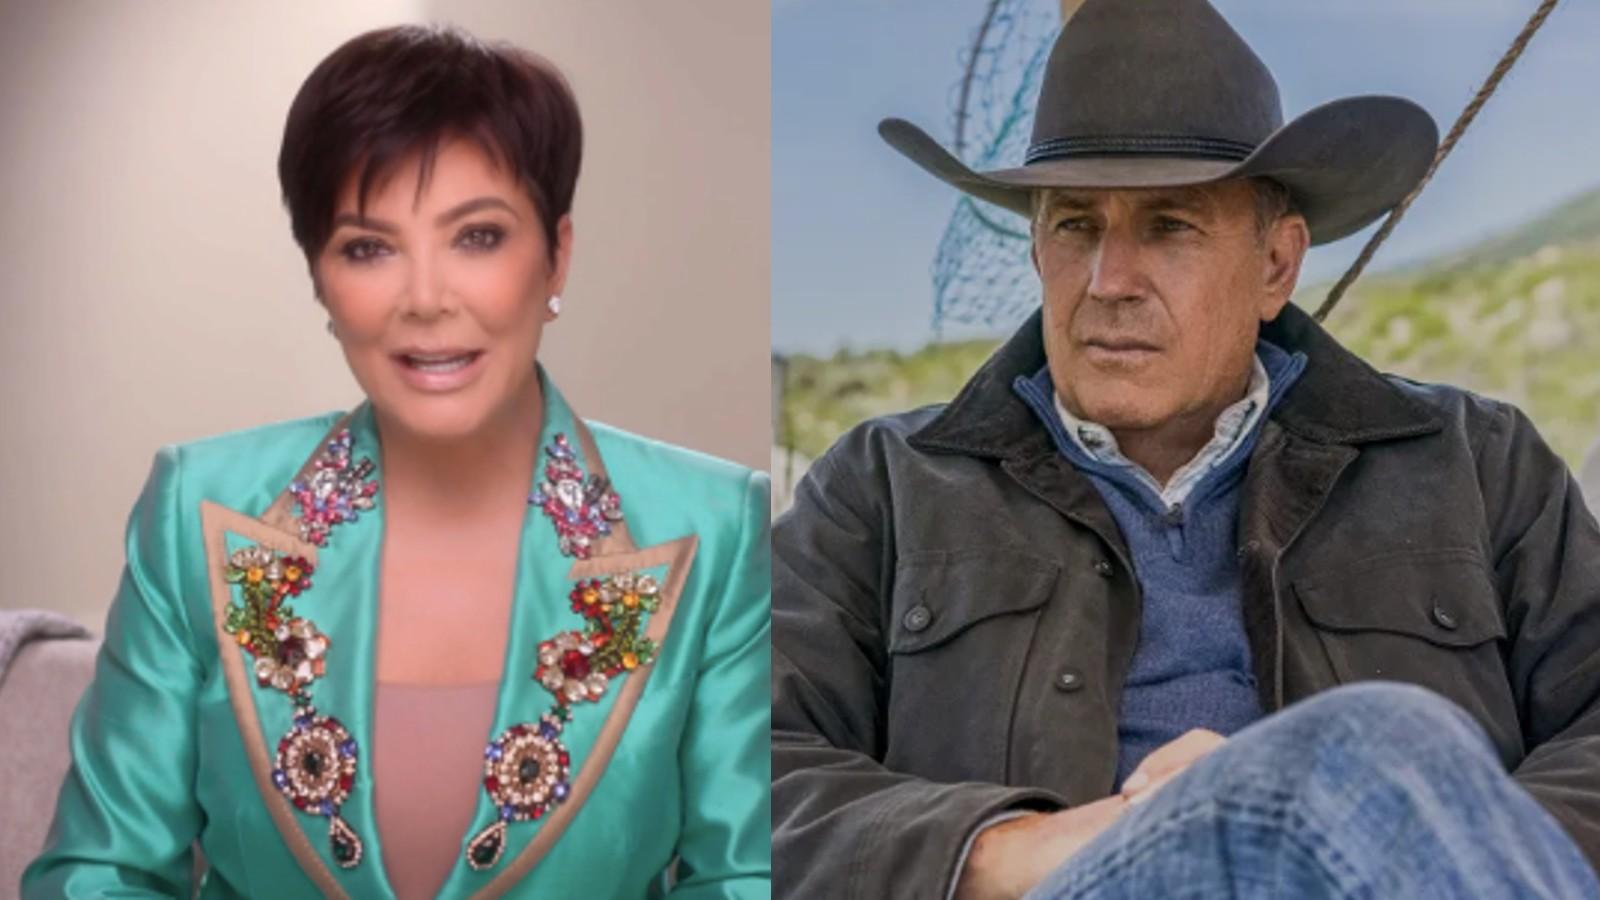 Kris Jenner in The Kardashians and Kevin Costner as John Dutton III in Yellowstone